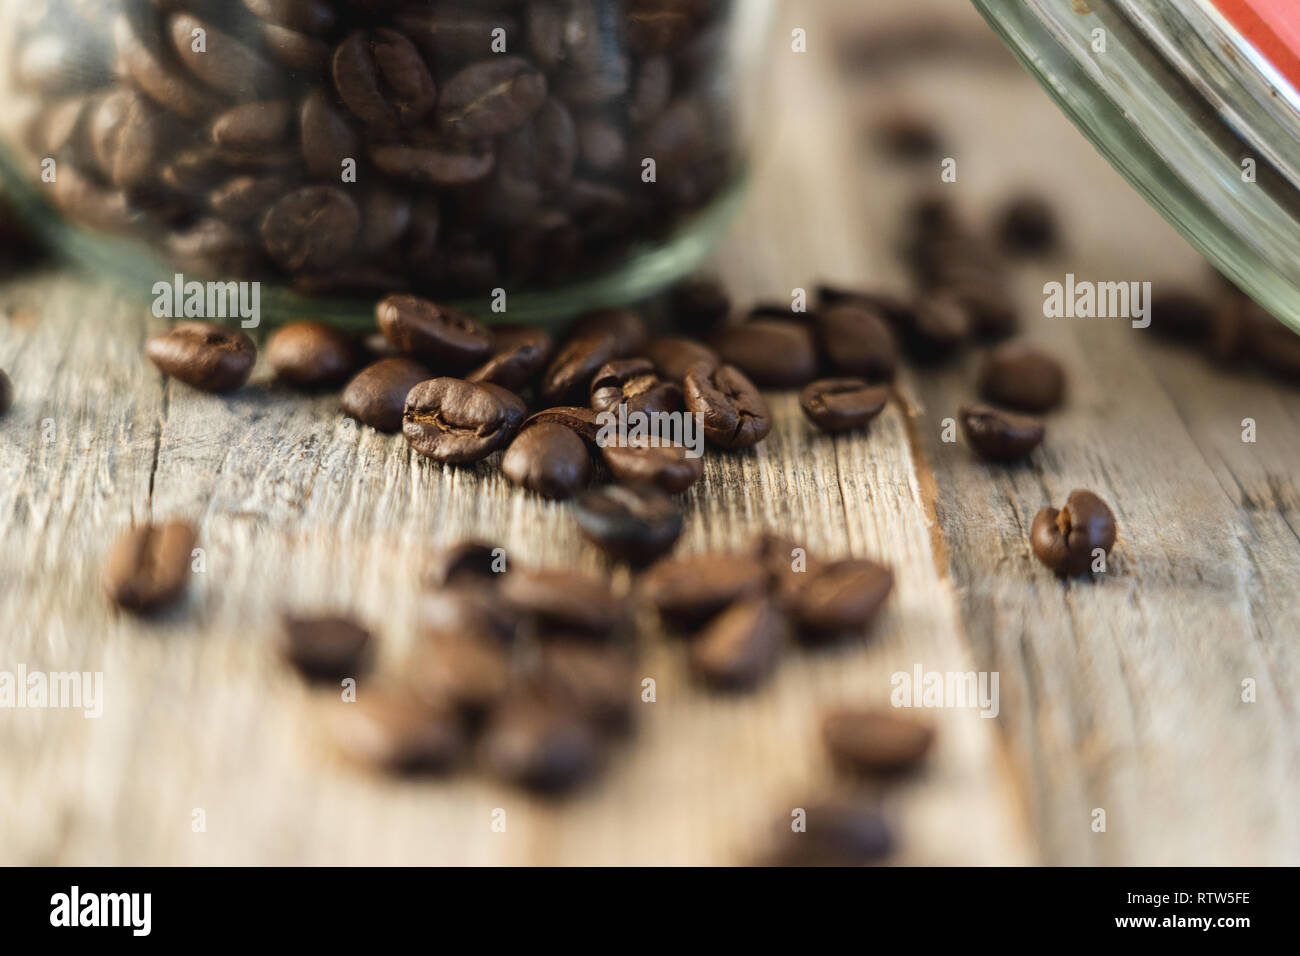 Close-up shot of roasted coffee beans on rustic wooden boards Stock Photo